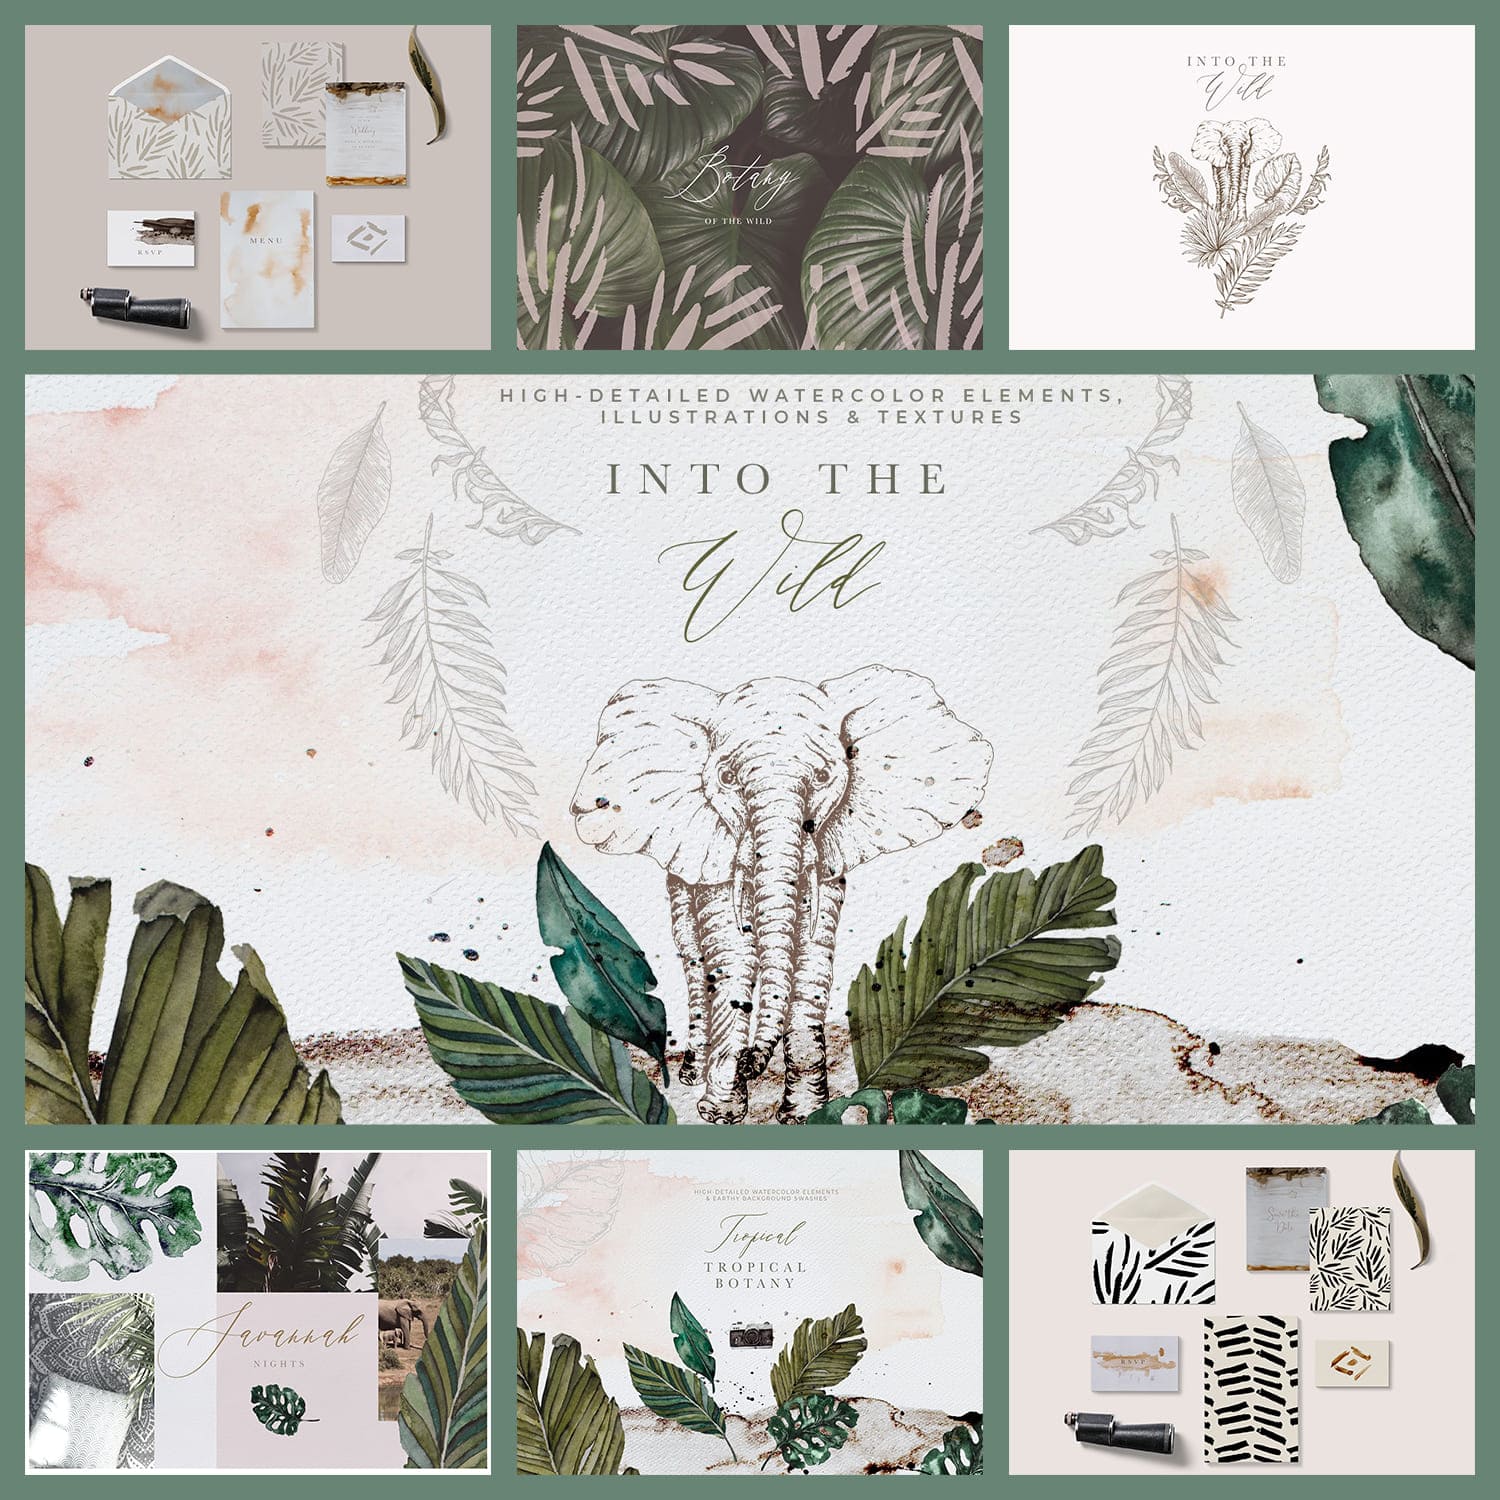 High-Detailed Watercolor Elements, Illustrations & Textures Into The Wild.